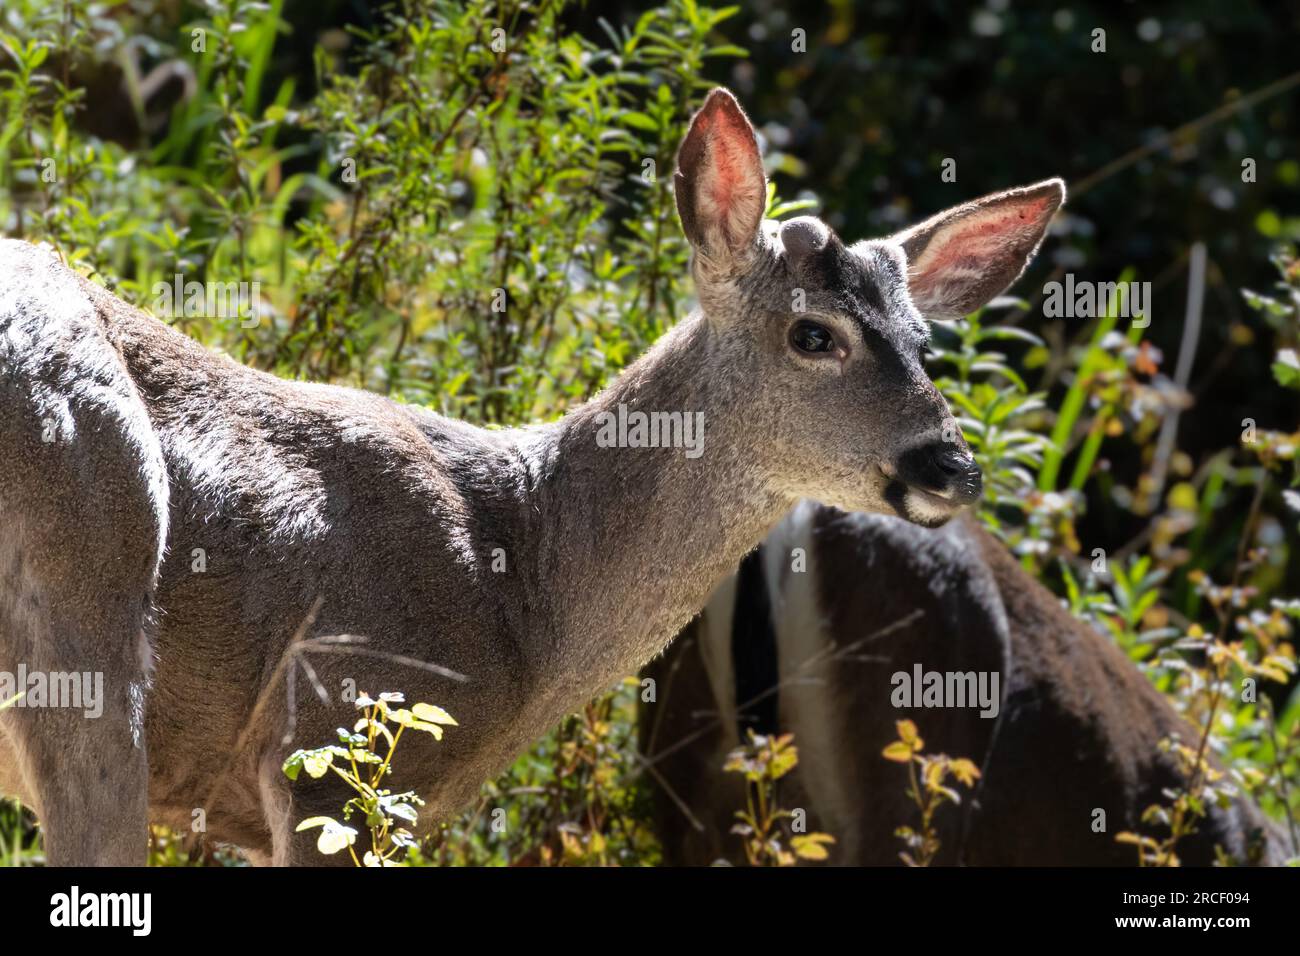 Closeup of Black-Tail deer (Odocoileus hemionus columbianus), in Pfeiffer Big Sur State Park. Looking at camera. Forest in background. Stock Photo